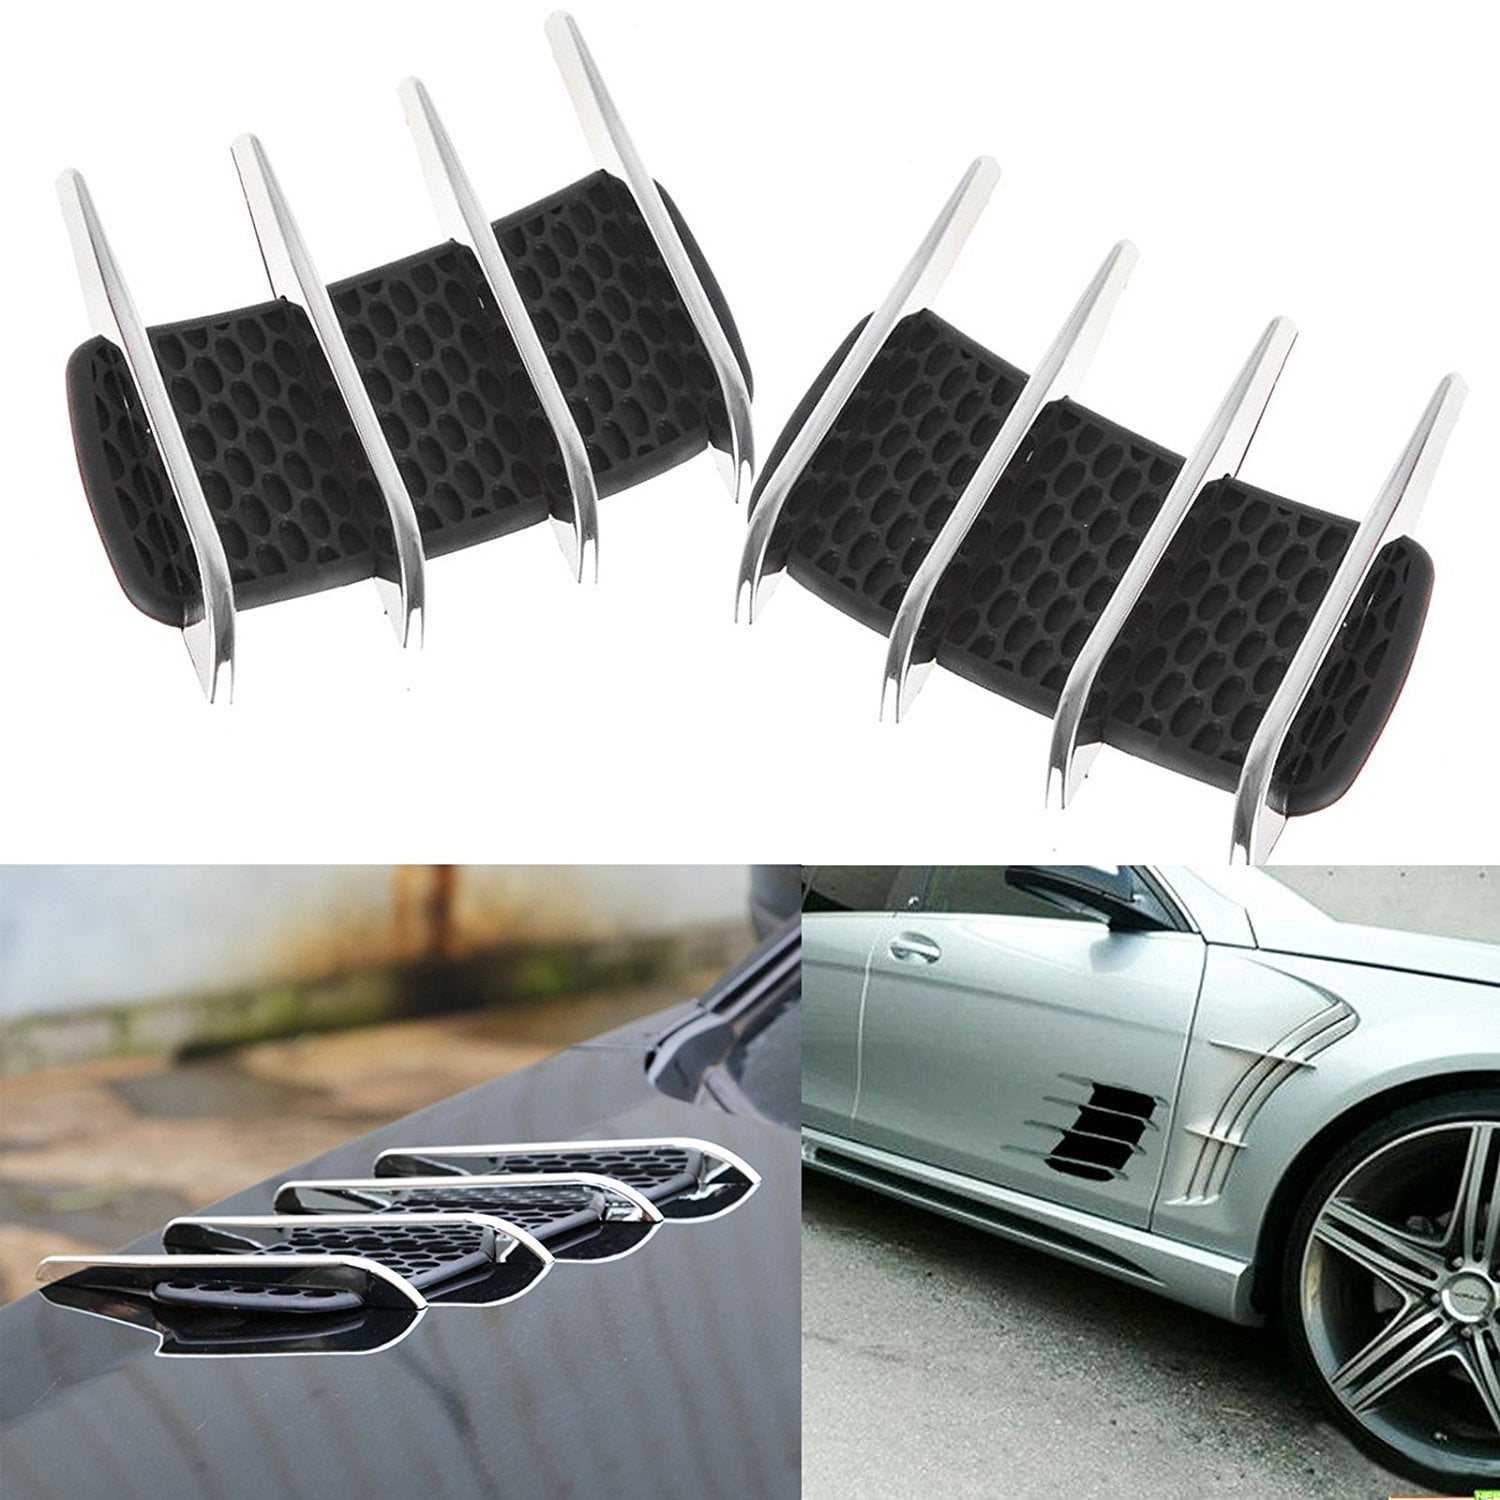 Cishop Car Styling Universal Car Stickers Turbo Bonnet Vent Cover Exterior Accessories Side vents decorative Air Flow Intake Scoop 